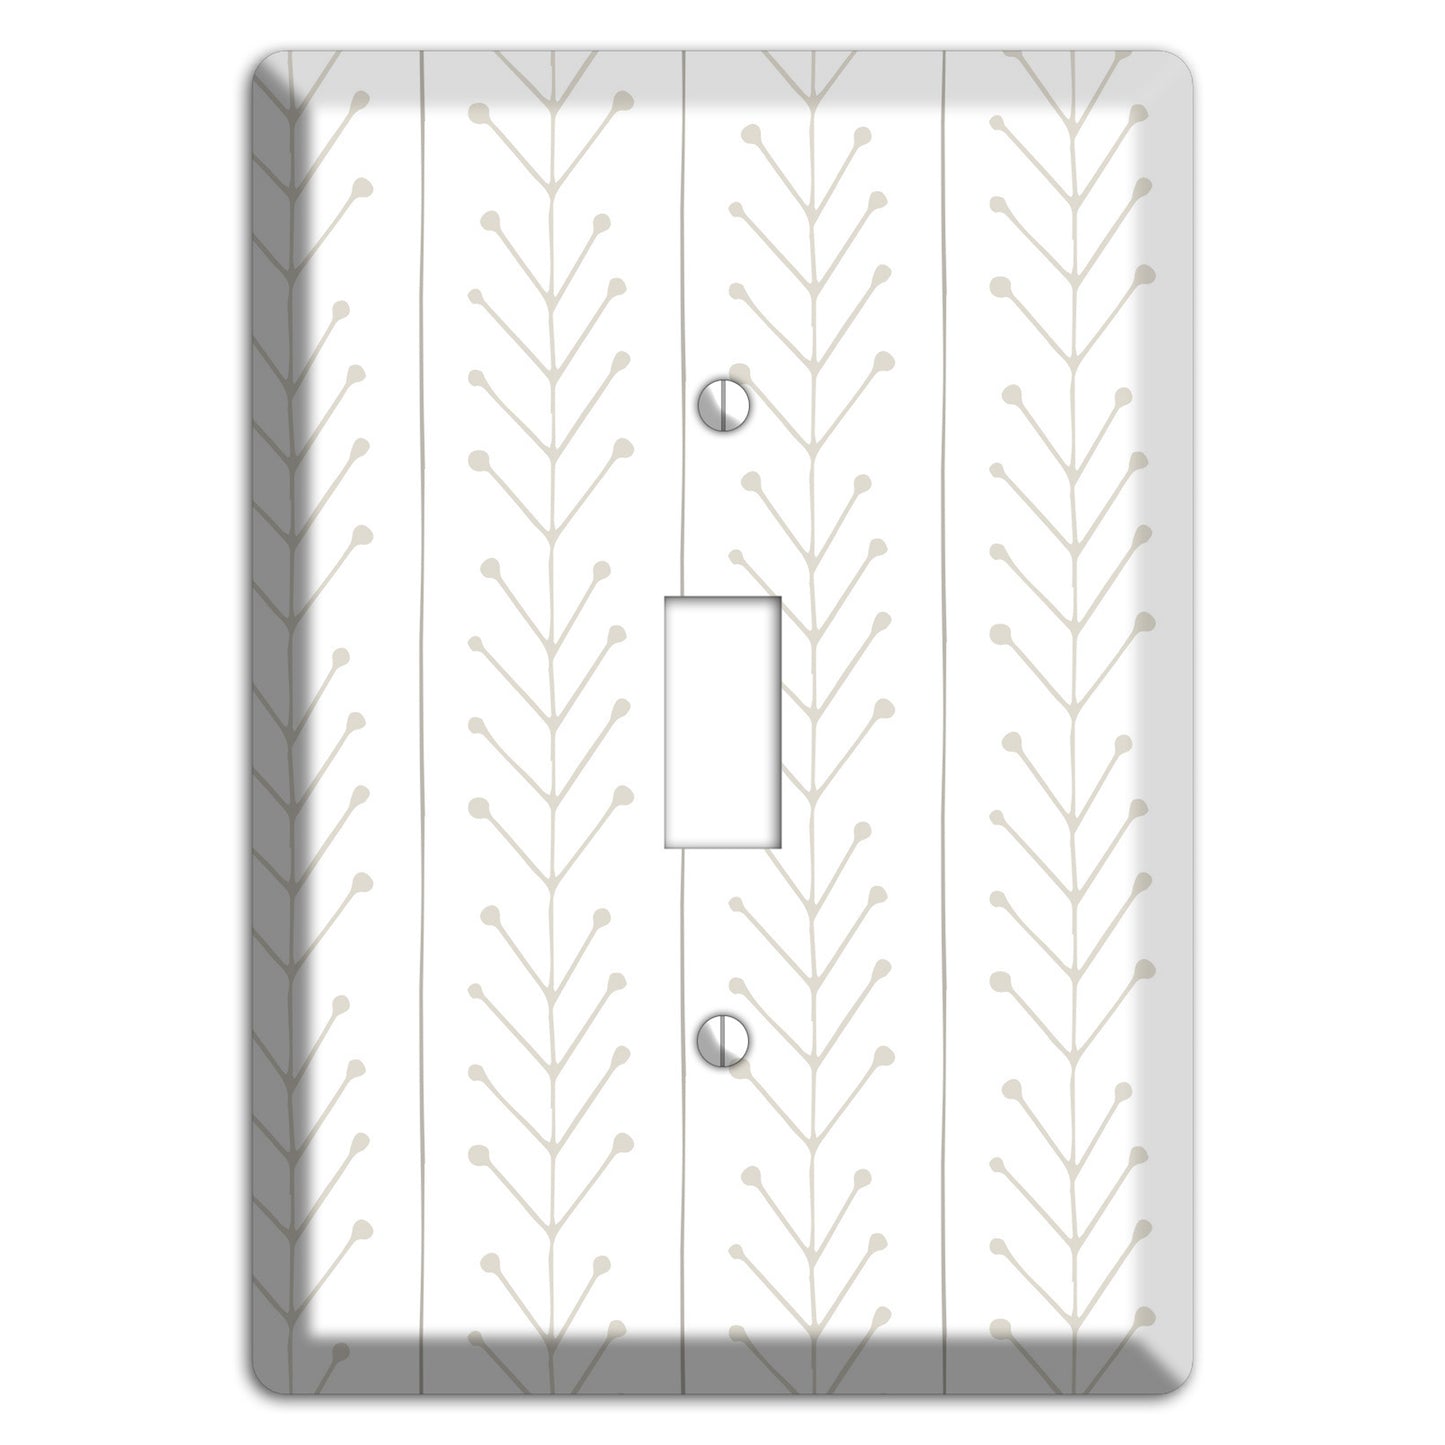 Simple Scandanavian Style F Cover Plates